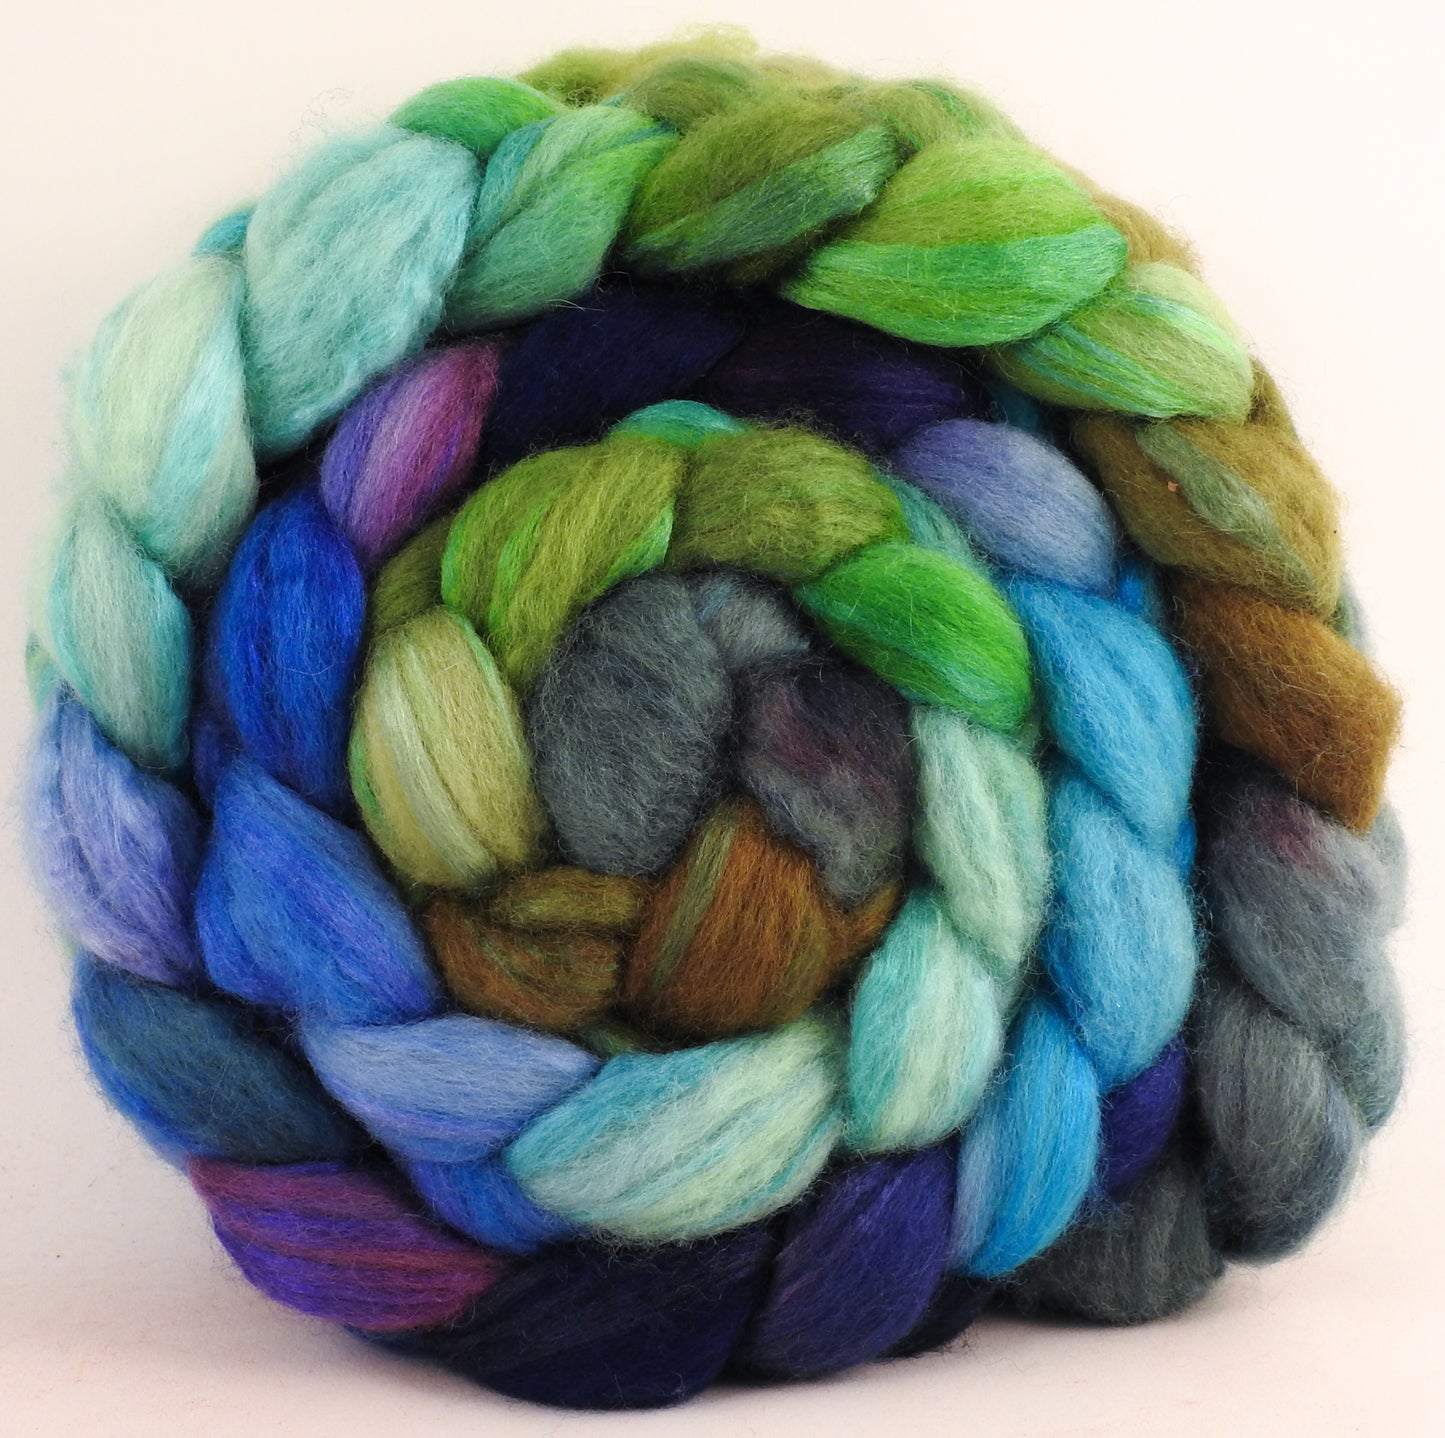 Blue-faced Leicester/ Tussah Silk (70/30) - Water Pixie